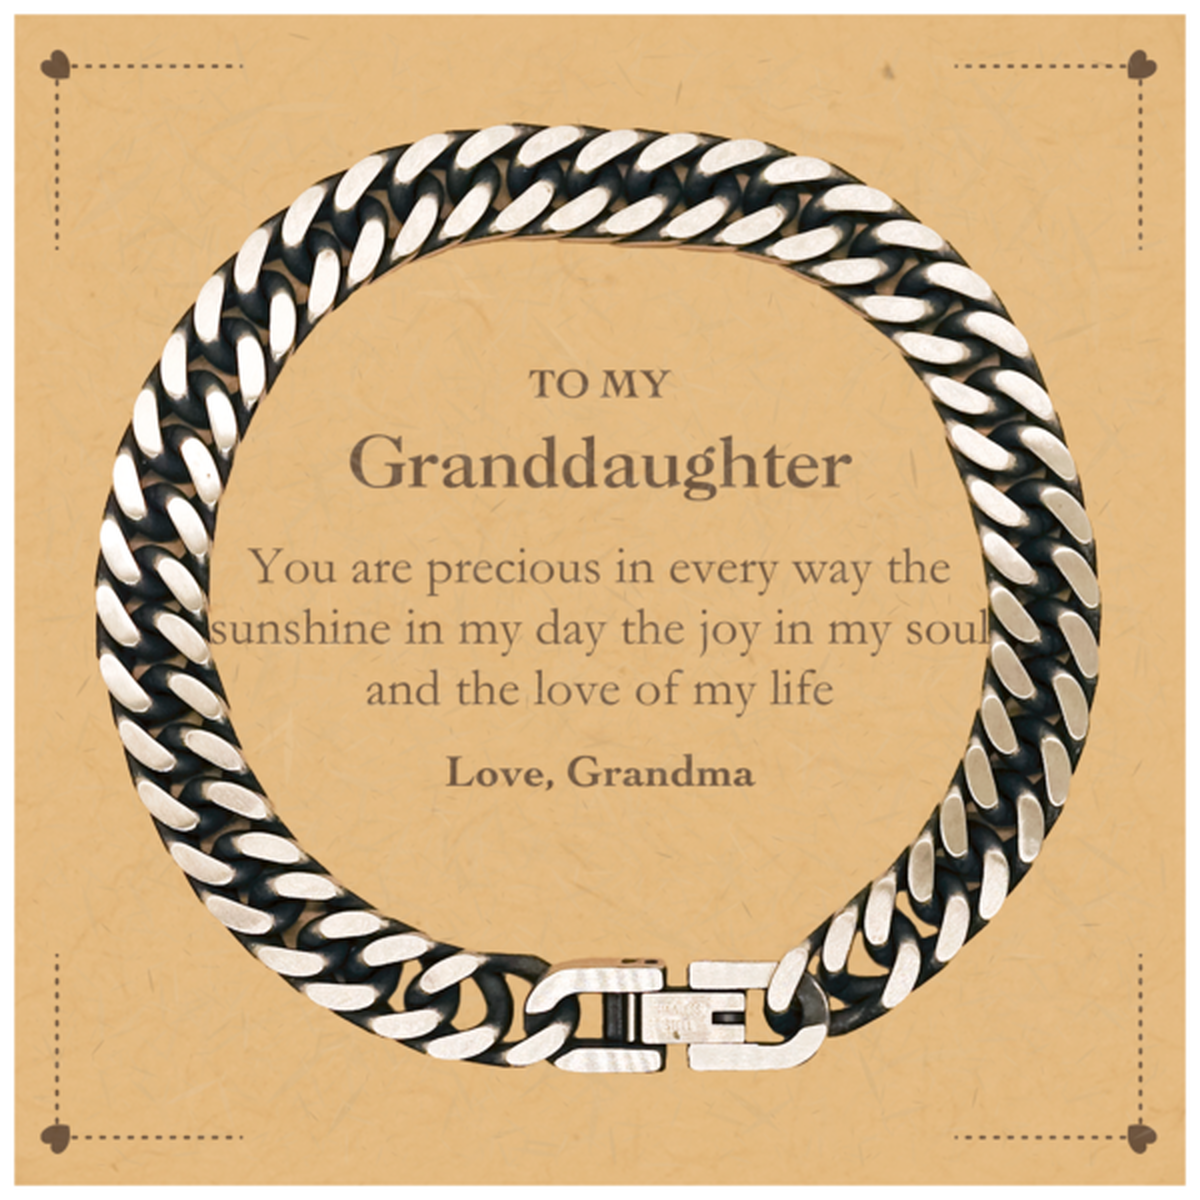 Graduation Gifts for Granddaughter Cuban Link Chain Bracelet Present from Grandma, Christmas Granddaughter Birthday Gifts Granddaughter You are precious in every way the sunshine in my day. Love, Grandma